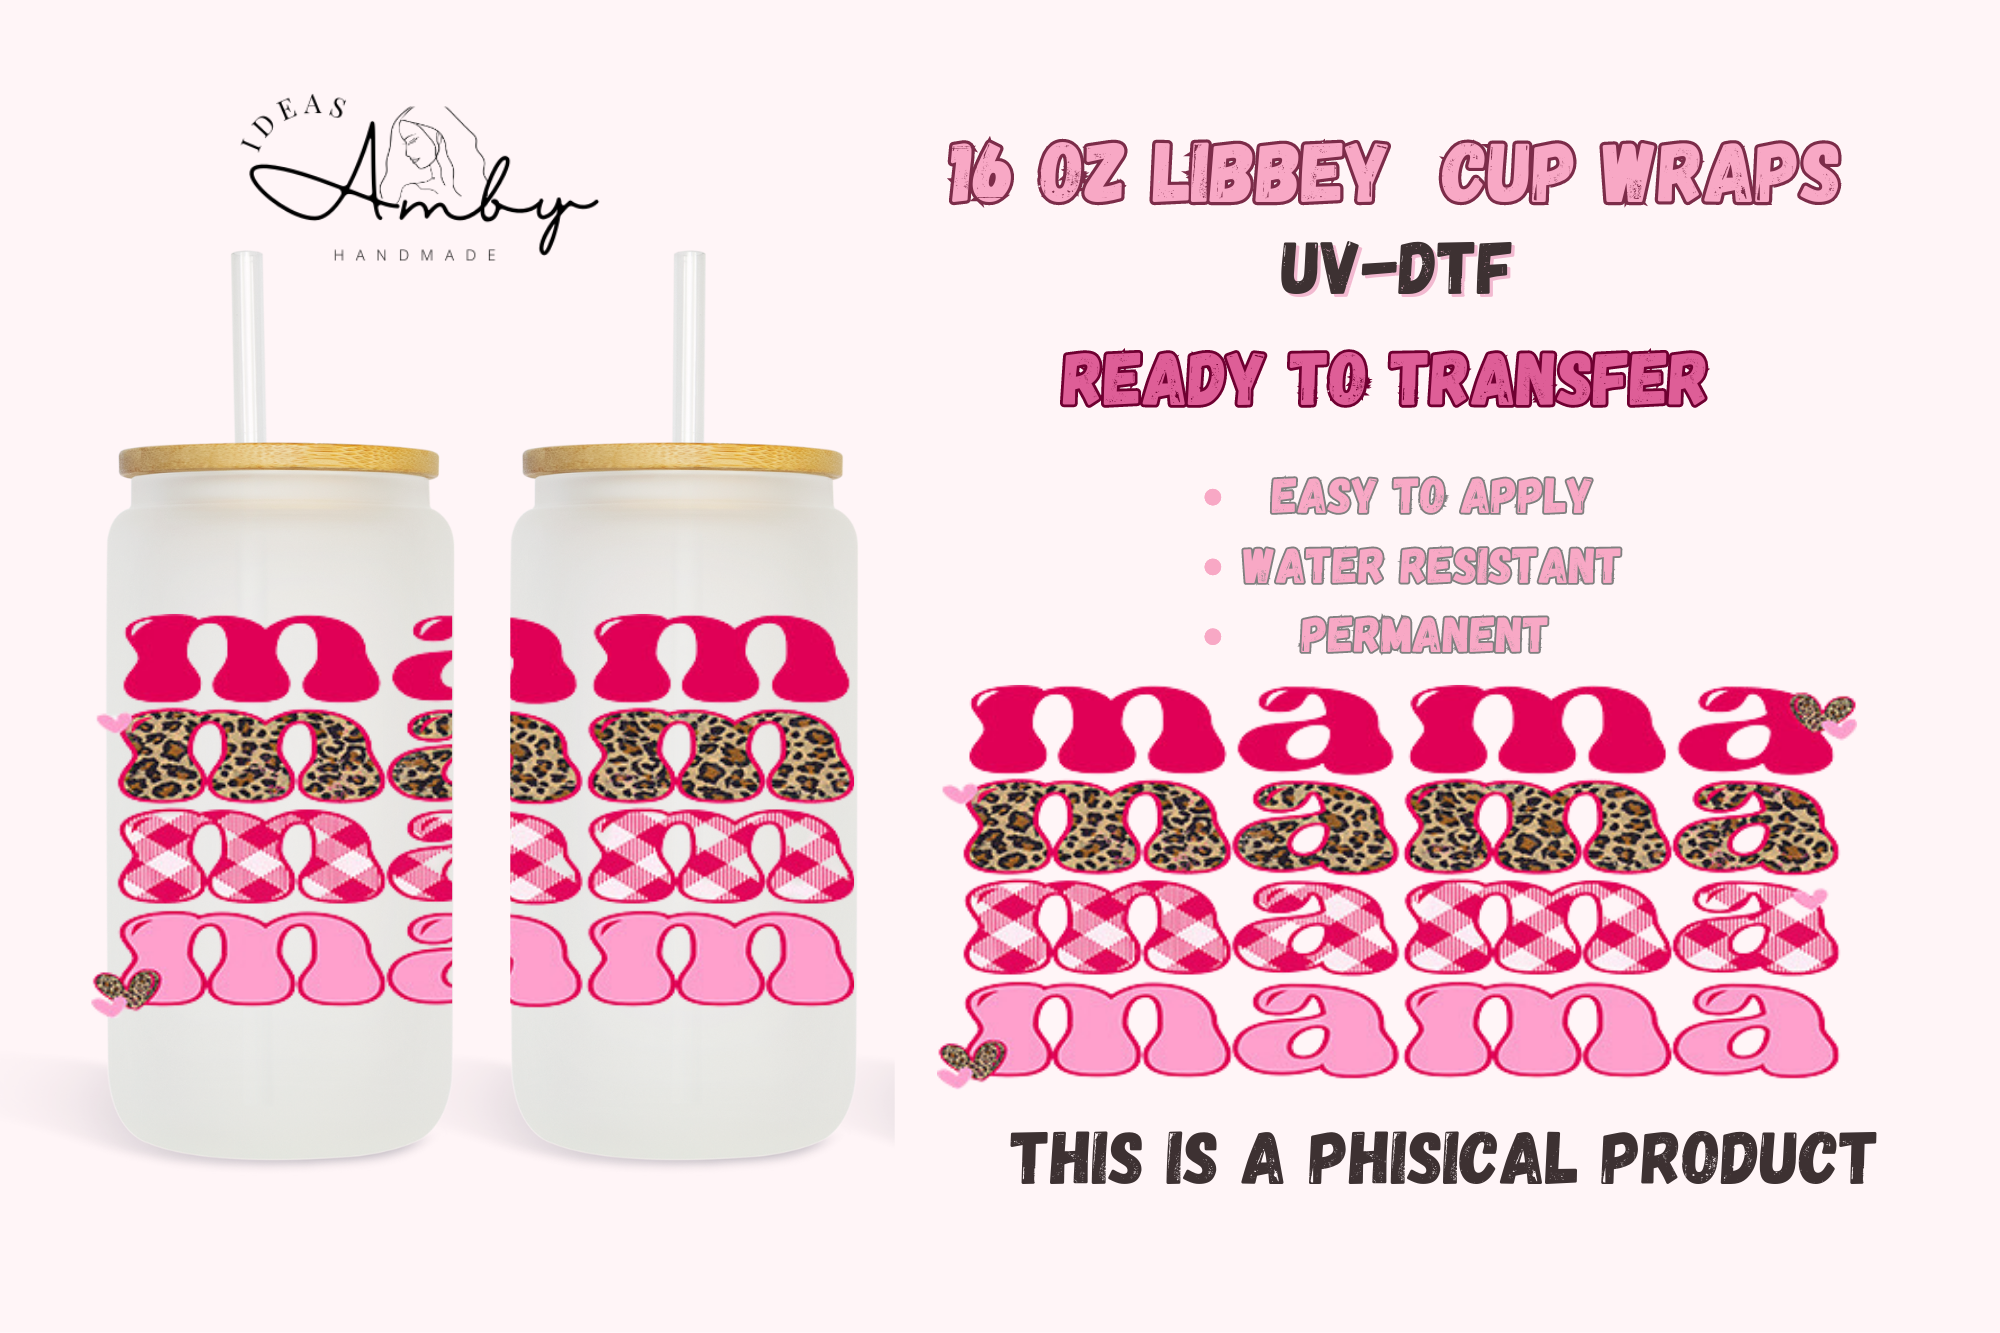 Power Puff UV DTF Cup Wrap